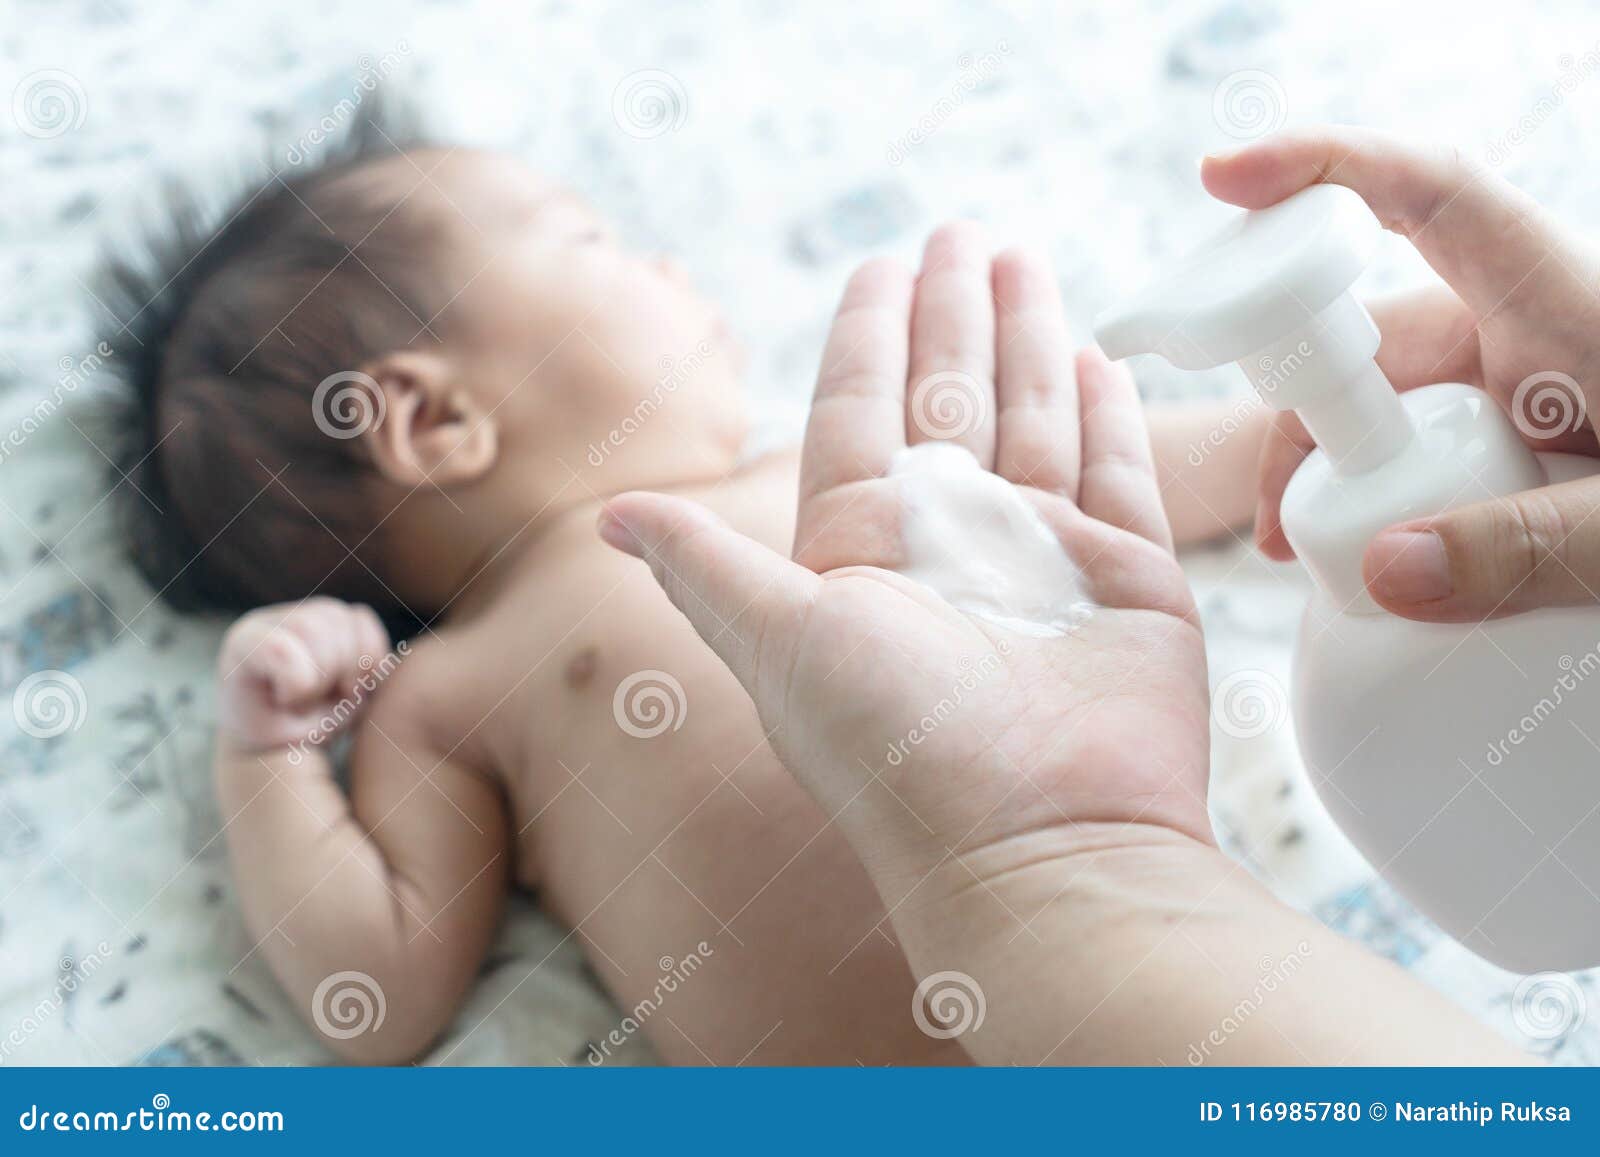 mother are applying a lotion cream on the baby body after bath